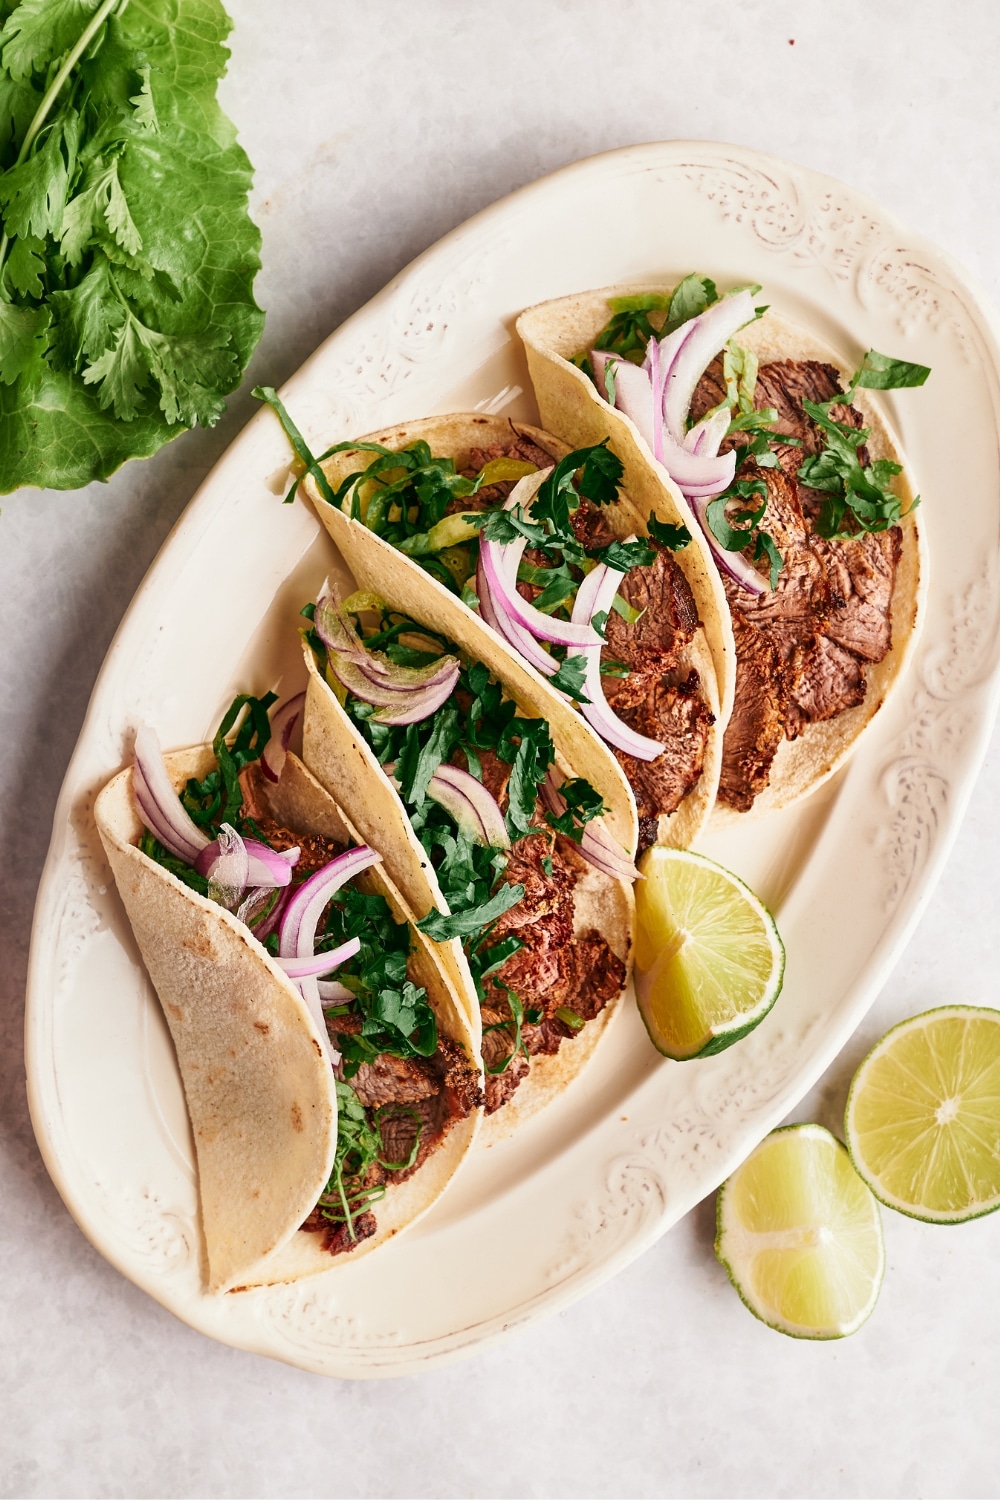 Four steak tacos with red onion and cilantro on a white plate.